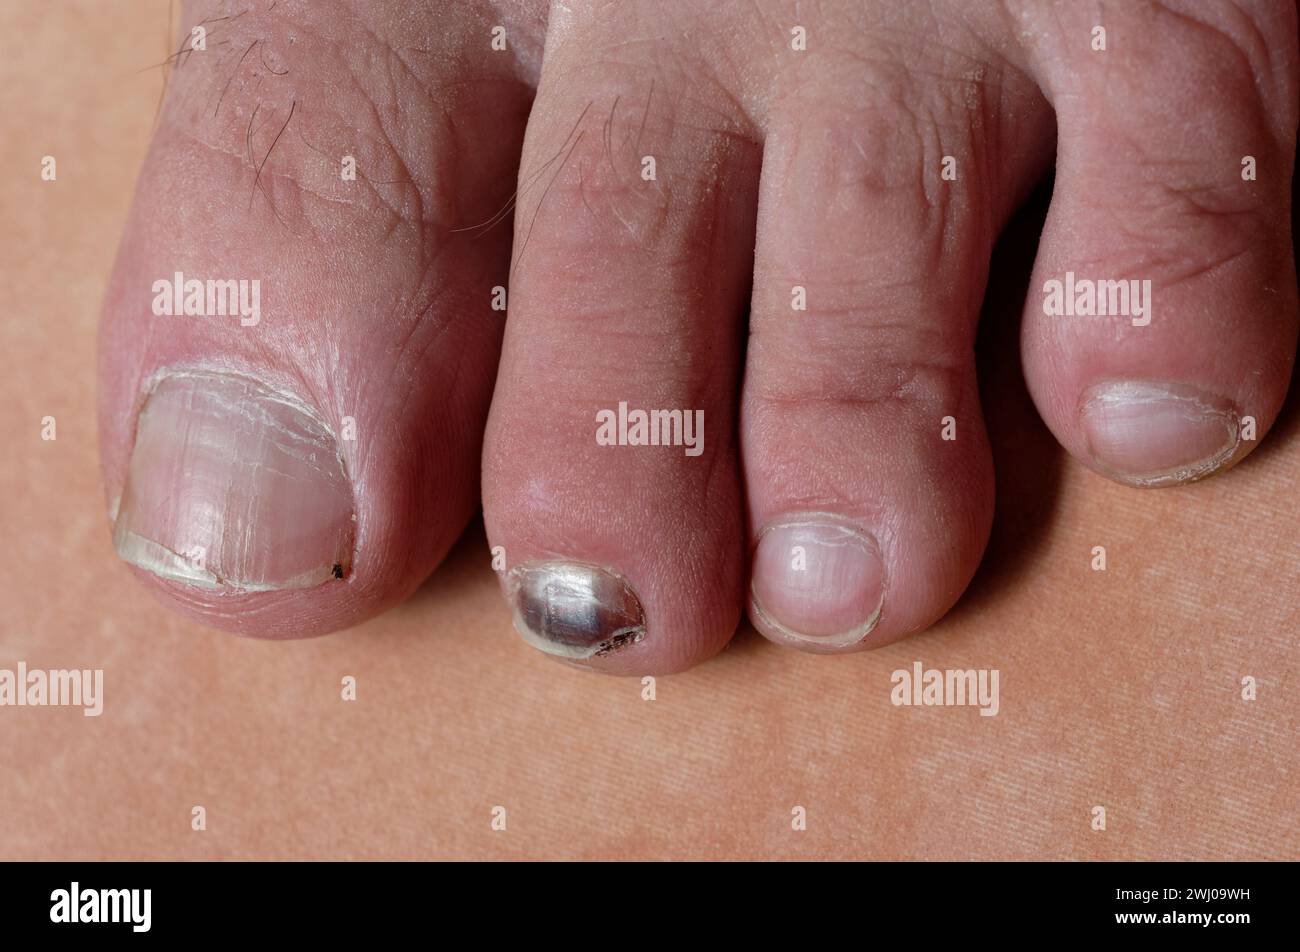 blood pooling under a toe nail causes it to look black 2WJ09WH